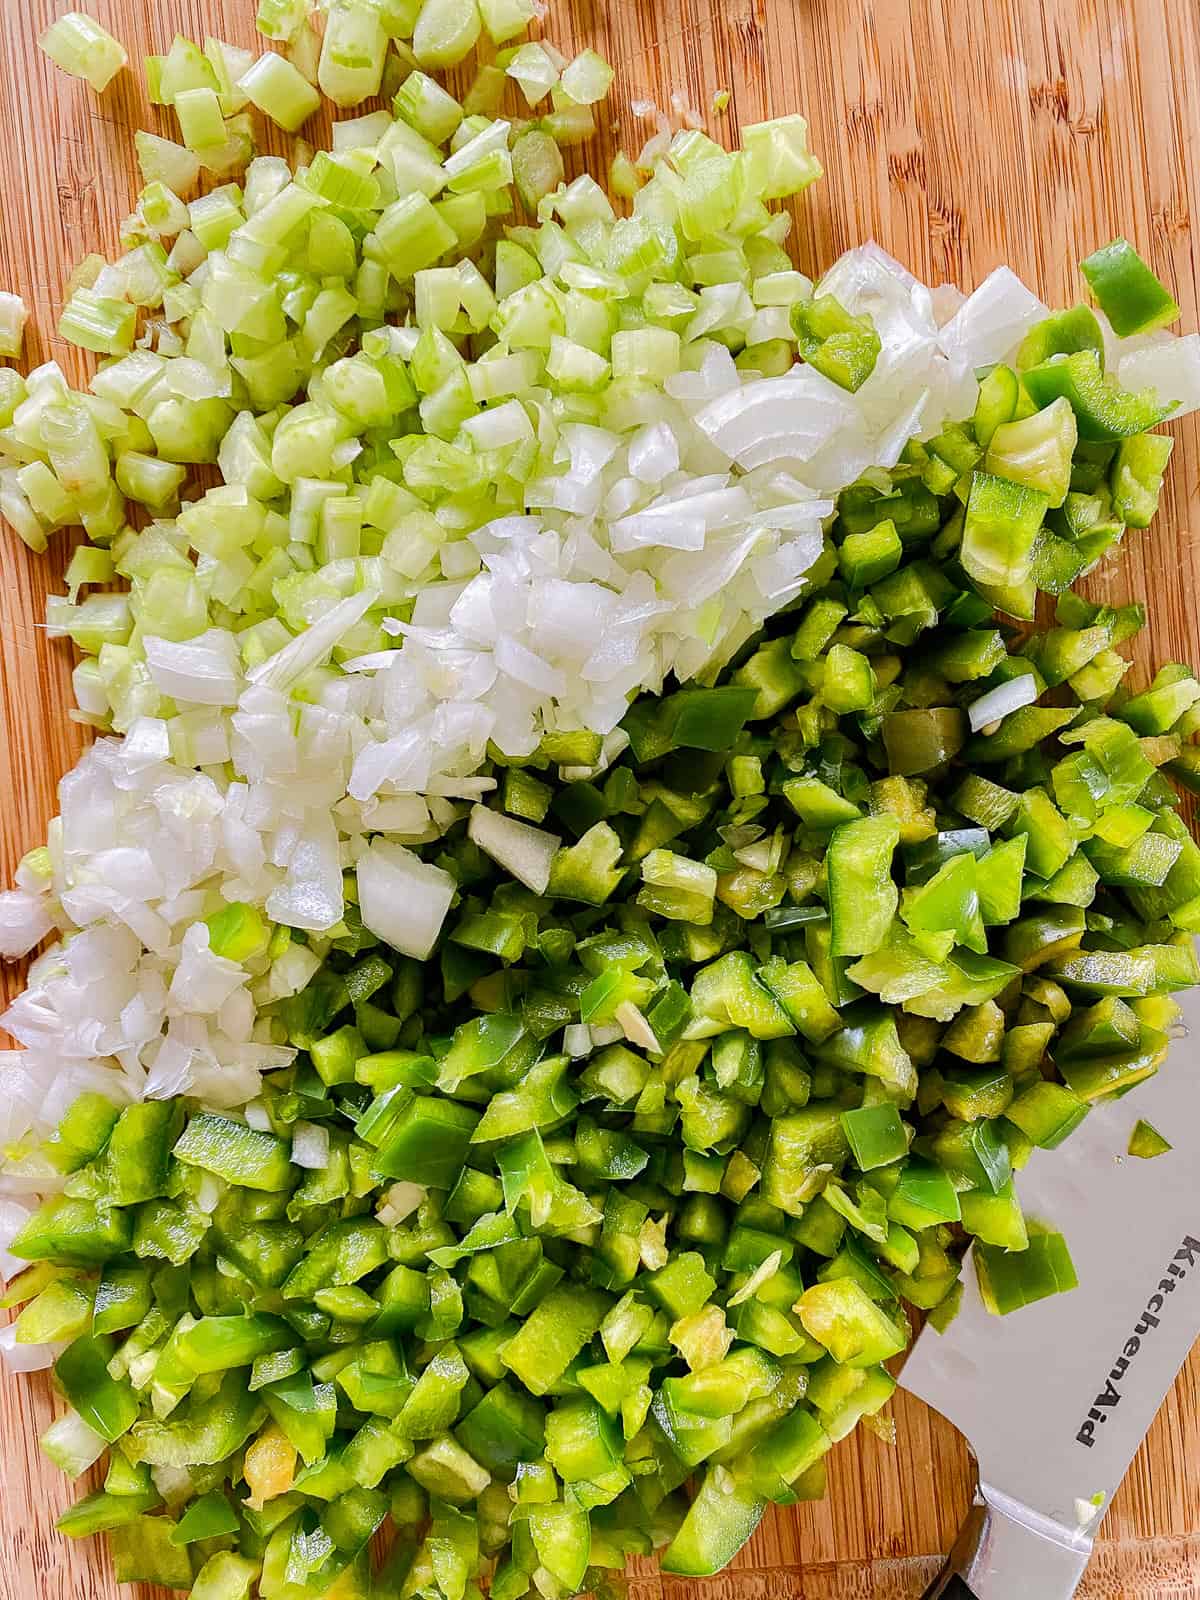 Diced celery, onion, and bell pepper on a cutting board with a knife next to it.